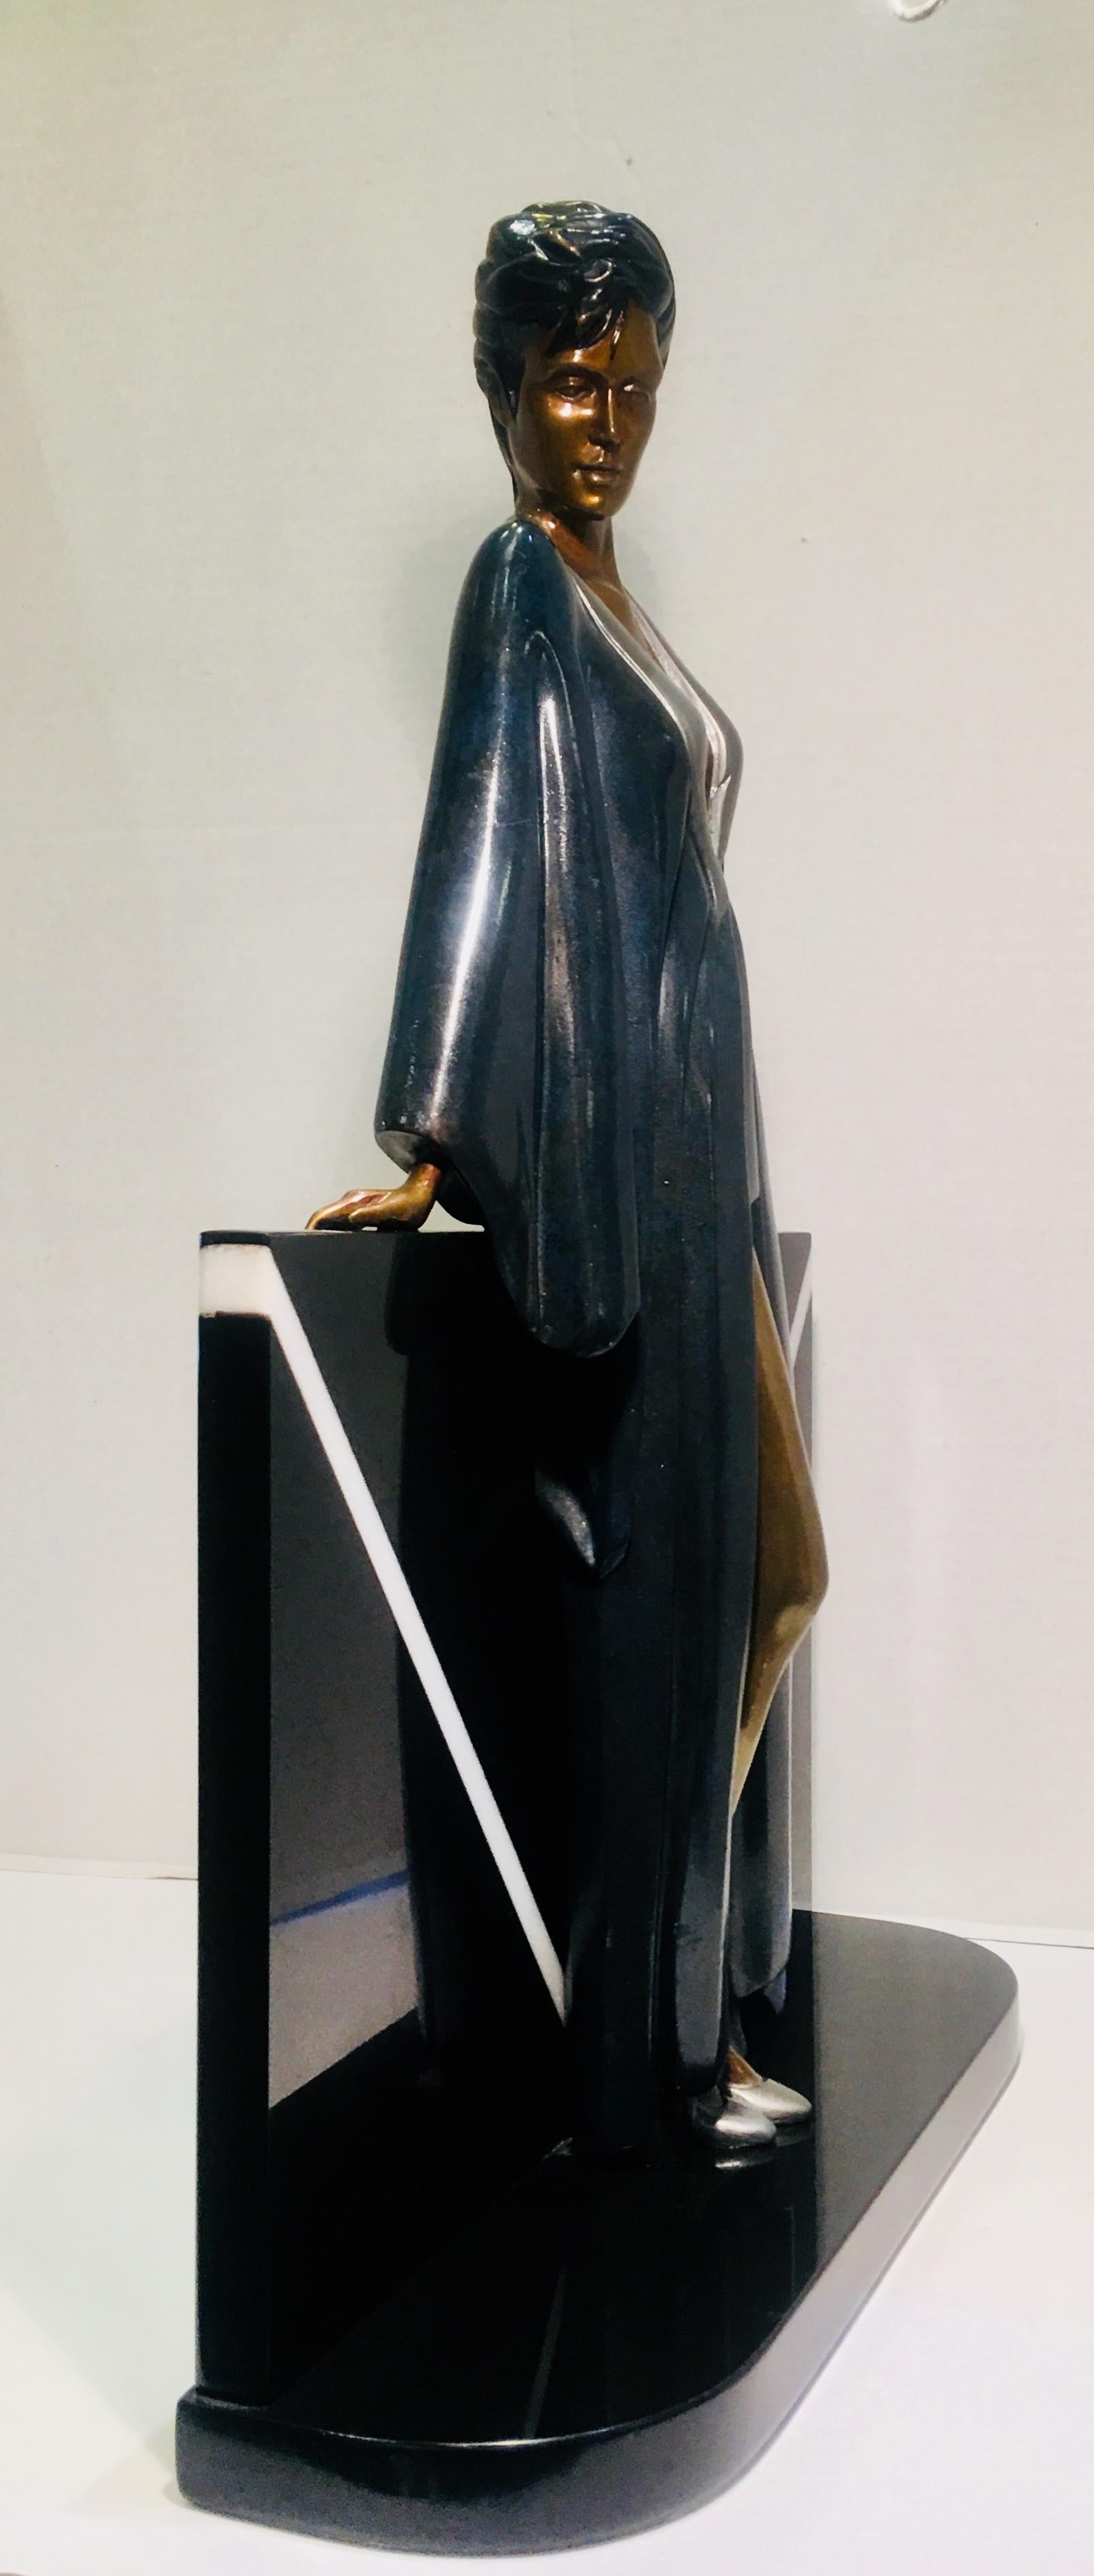 One of only two Patrick Nagel bronze sculptures to make it out of the foundry and limited to 180 pieces in the world, 